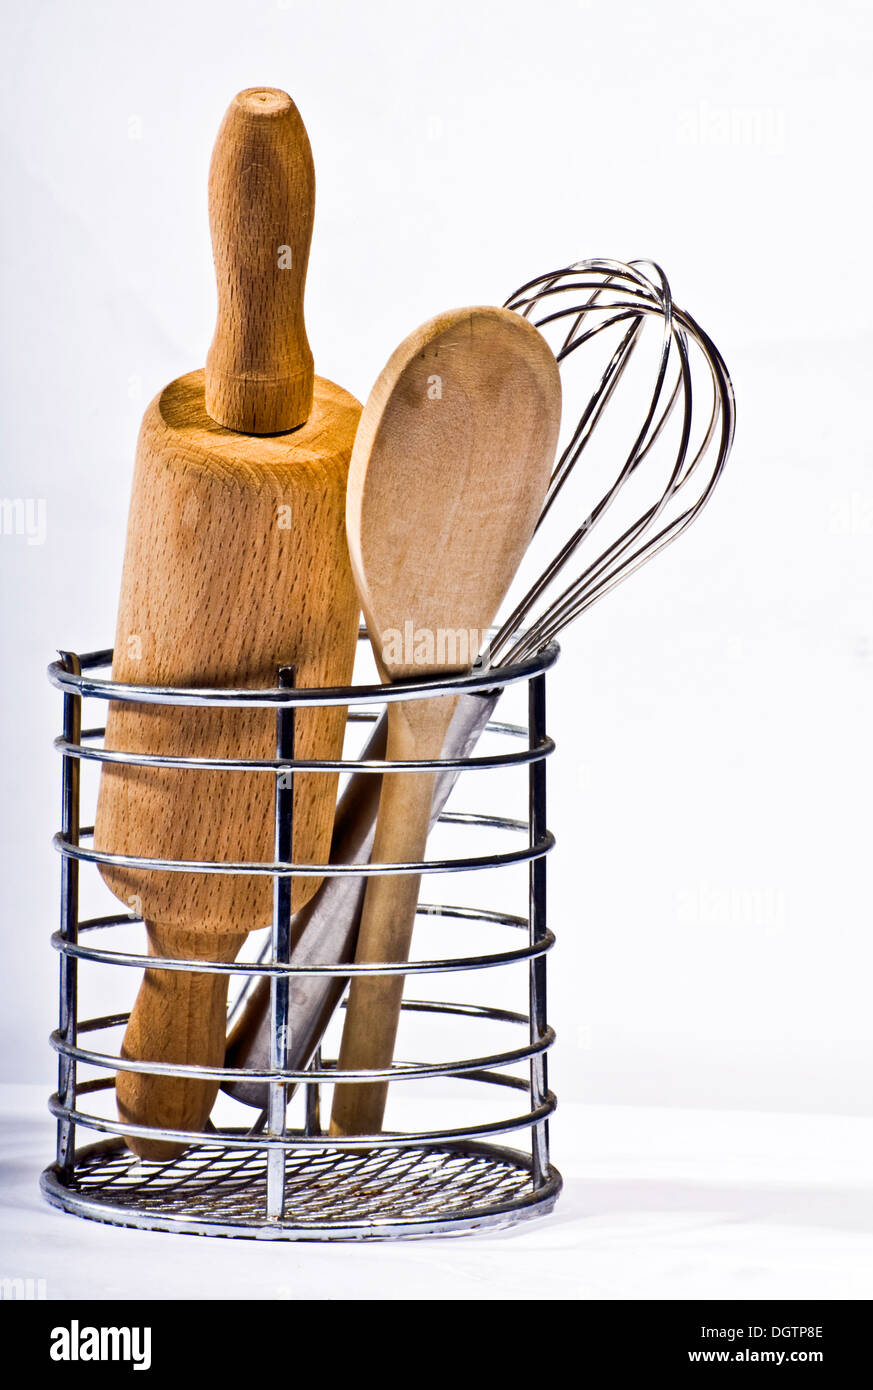 Kitchen utensils in a container on white background Stock Photo